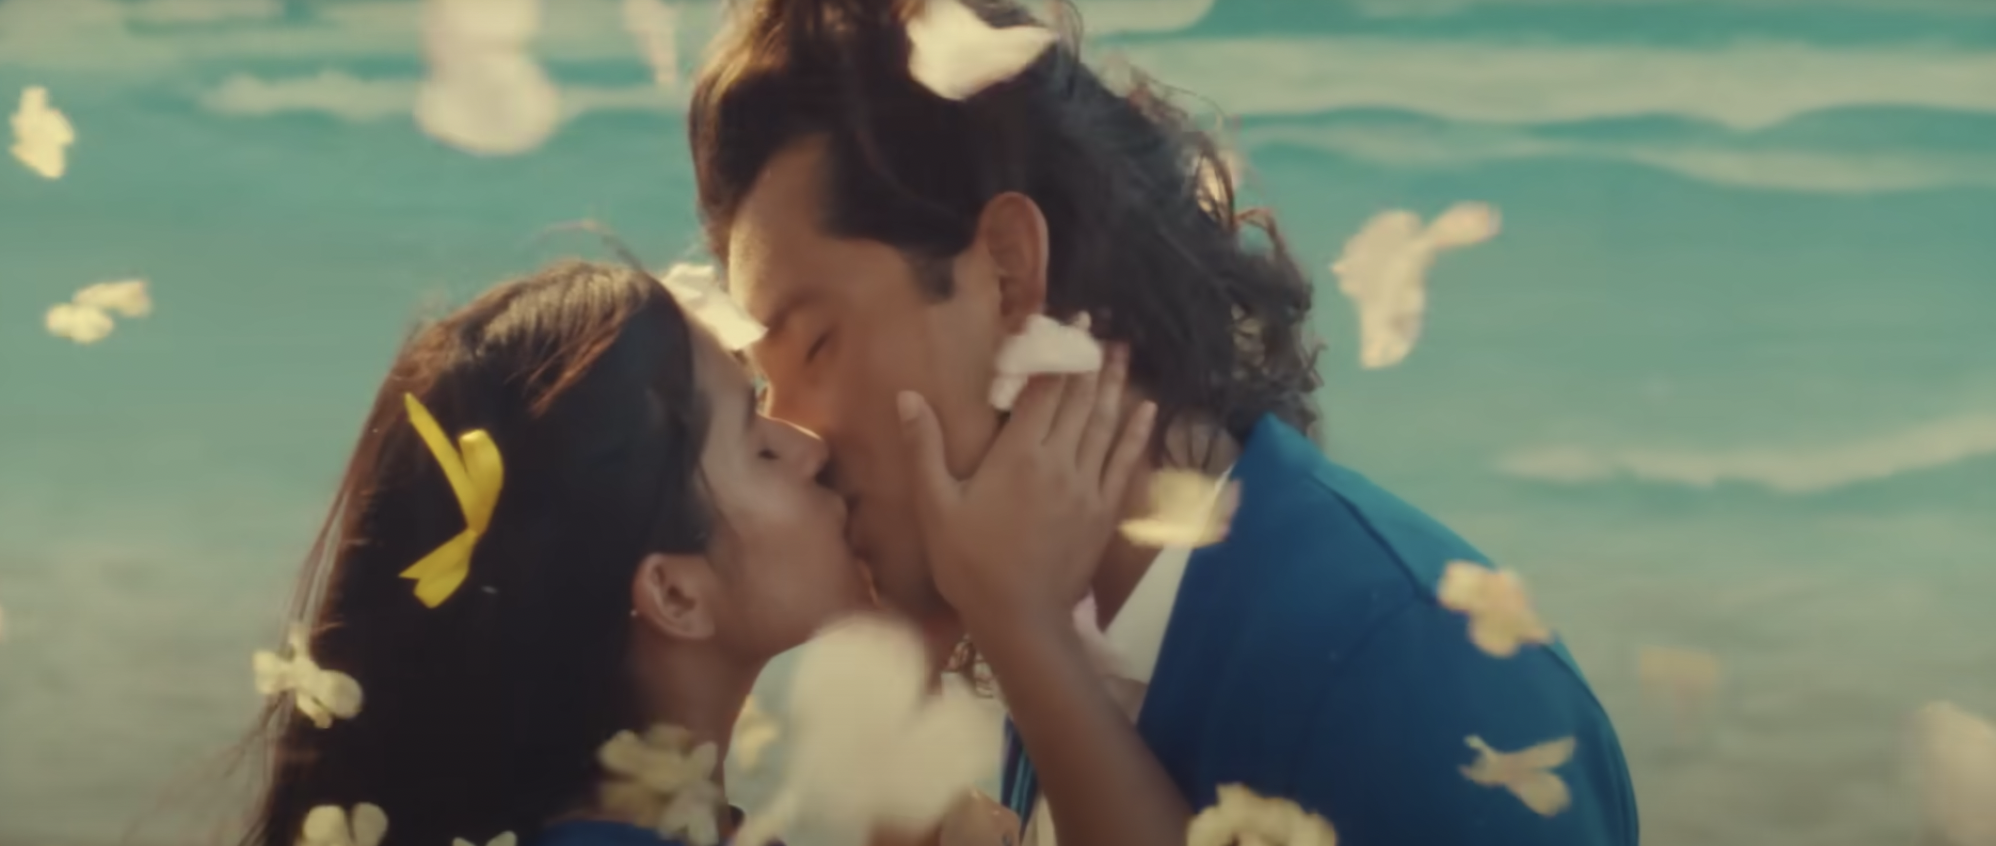 Two young people kisss with petals falling around them in front of a beach backdrop